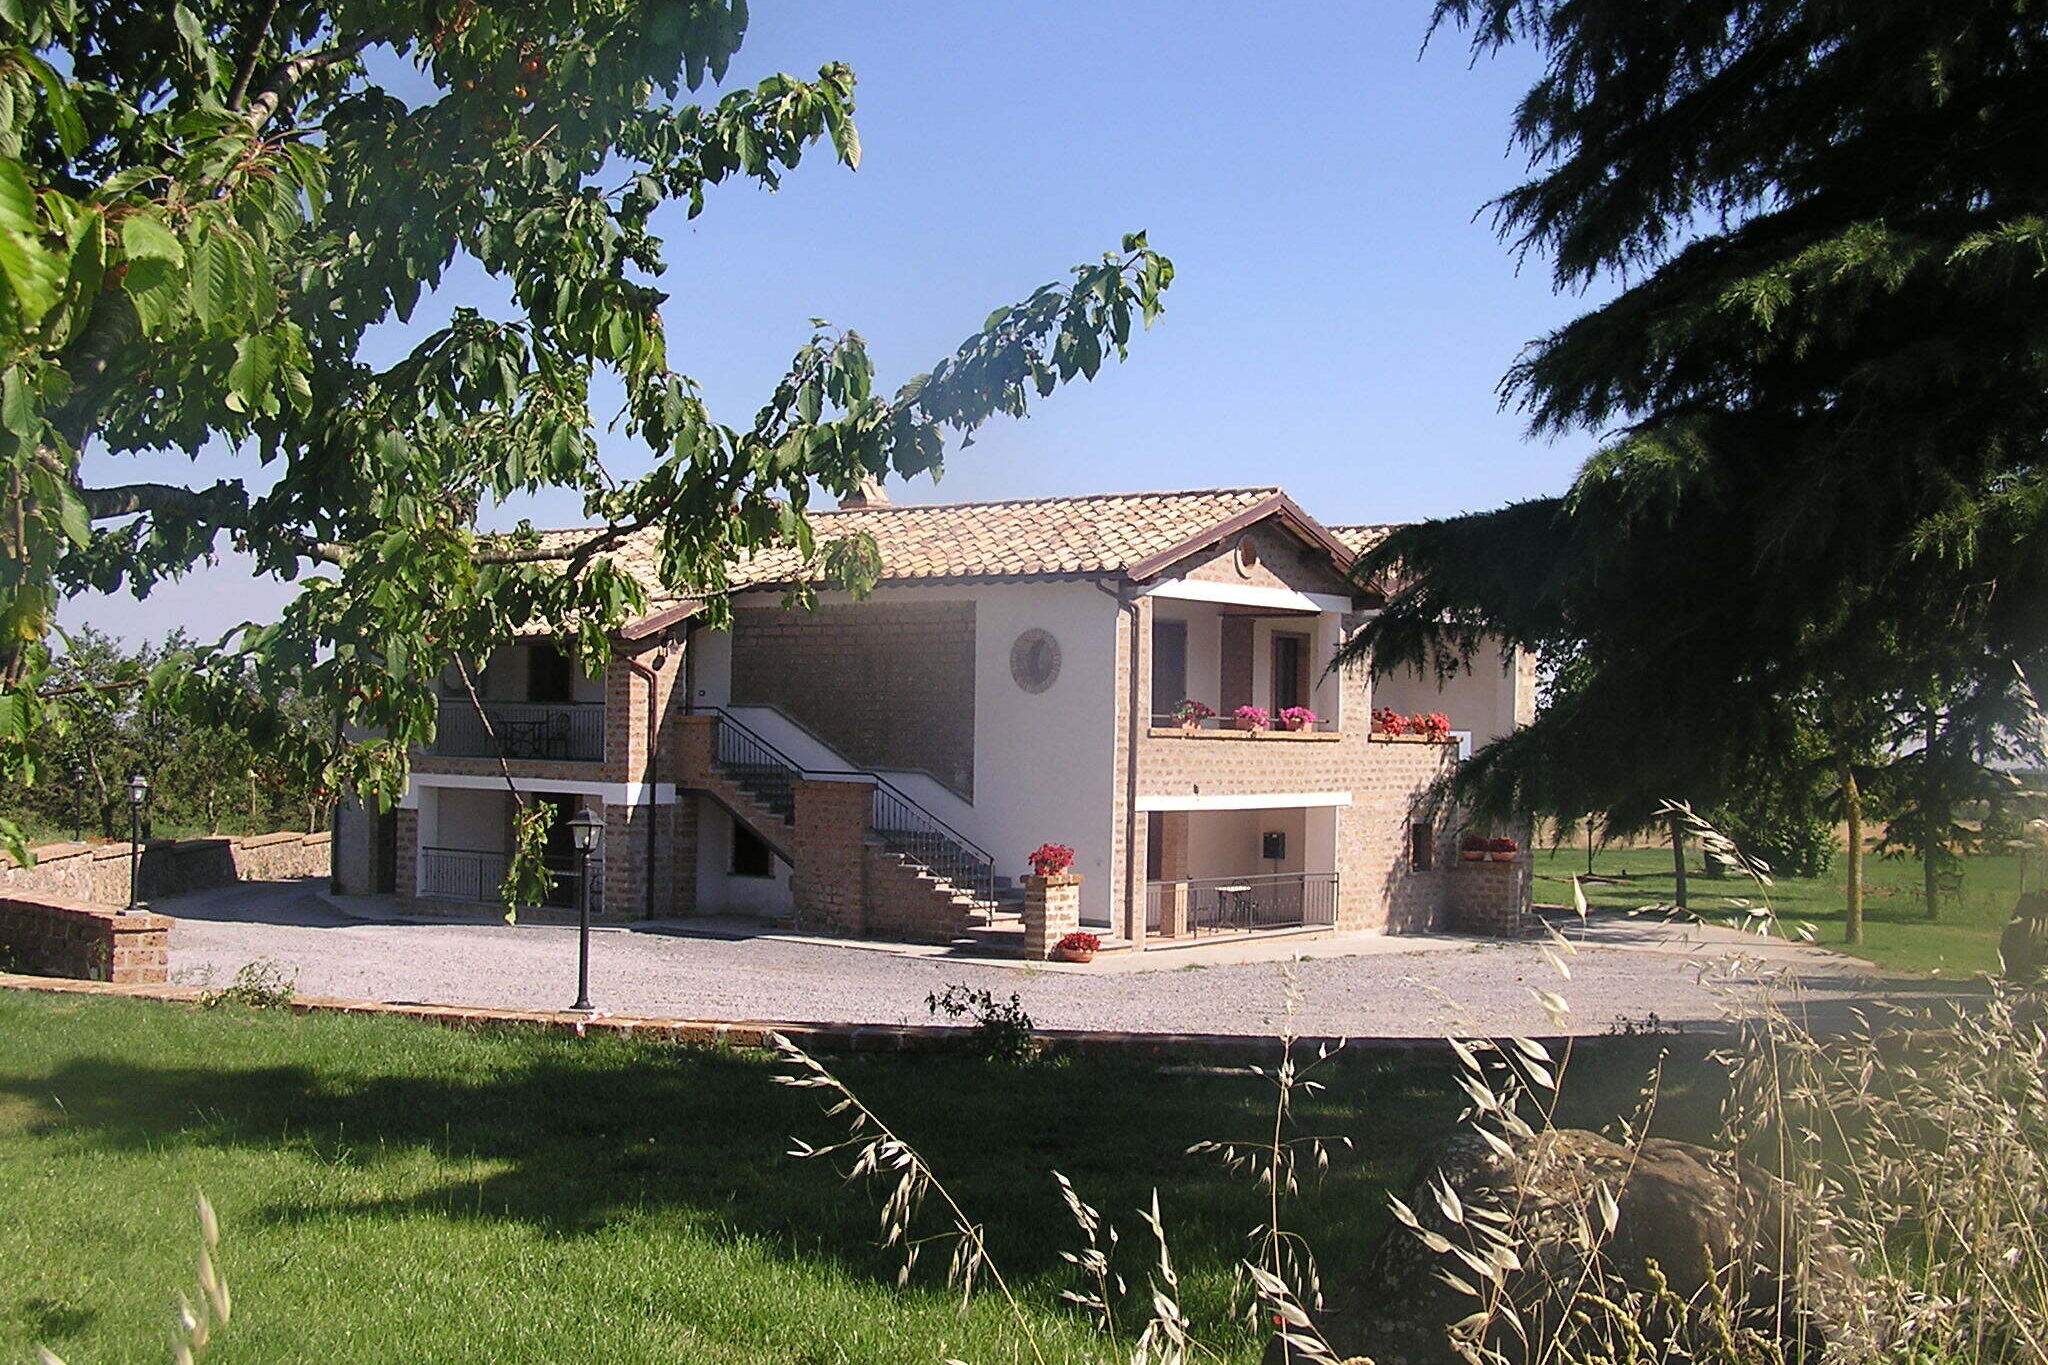 Elegant Farmhouse in Bagnoregio with swimming pool for 10-12 guests